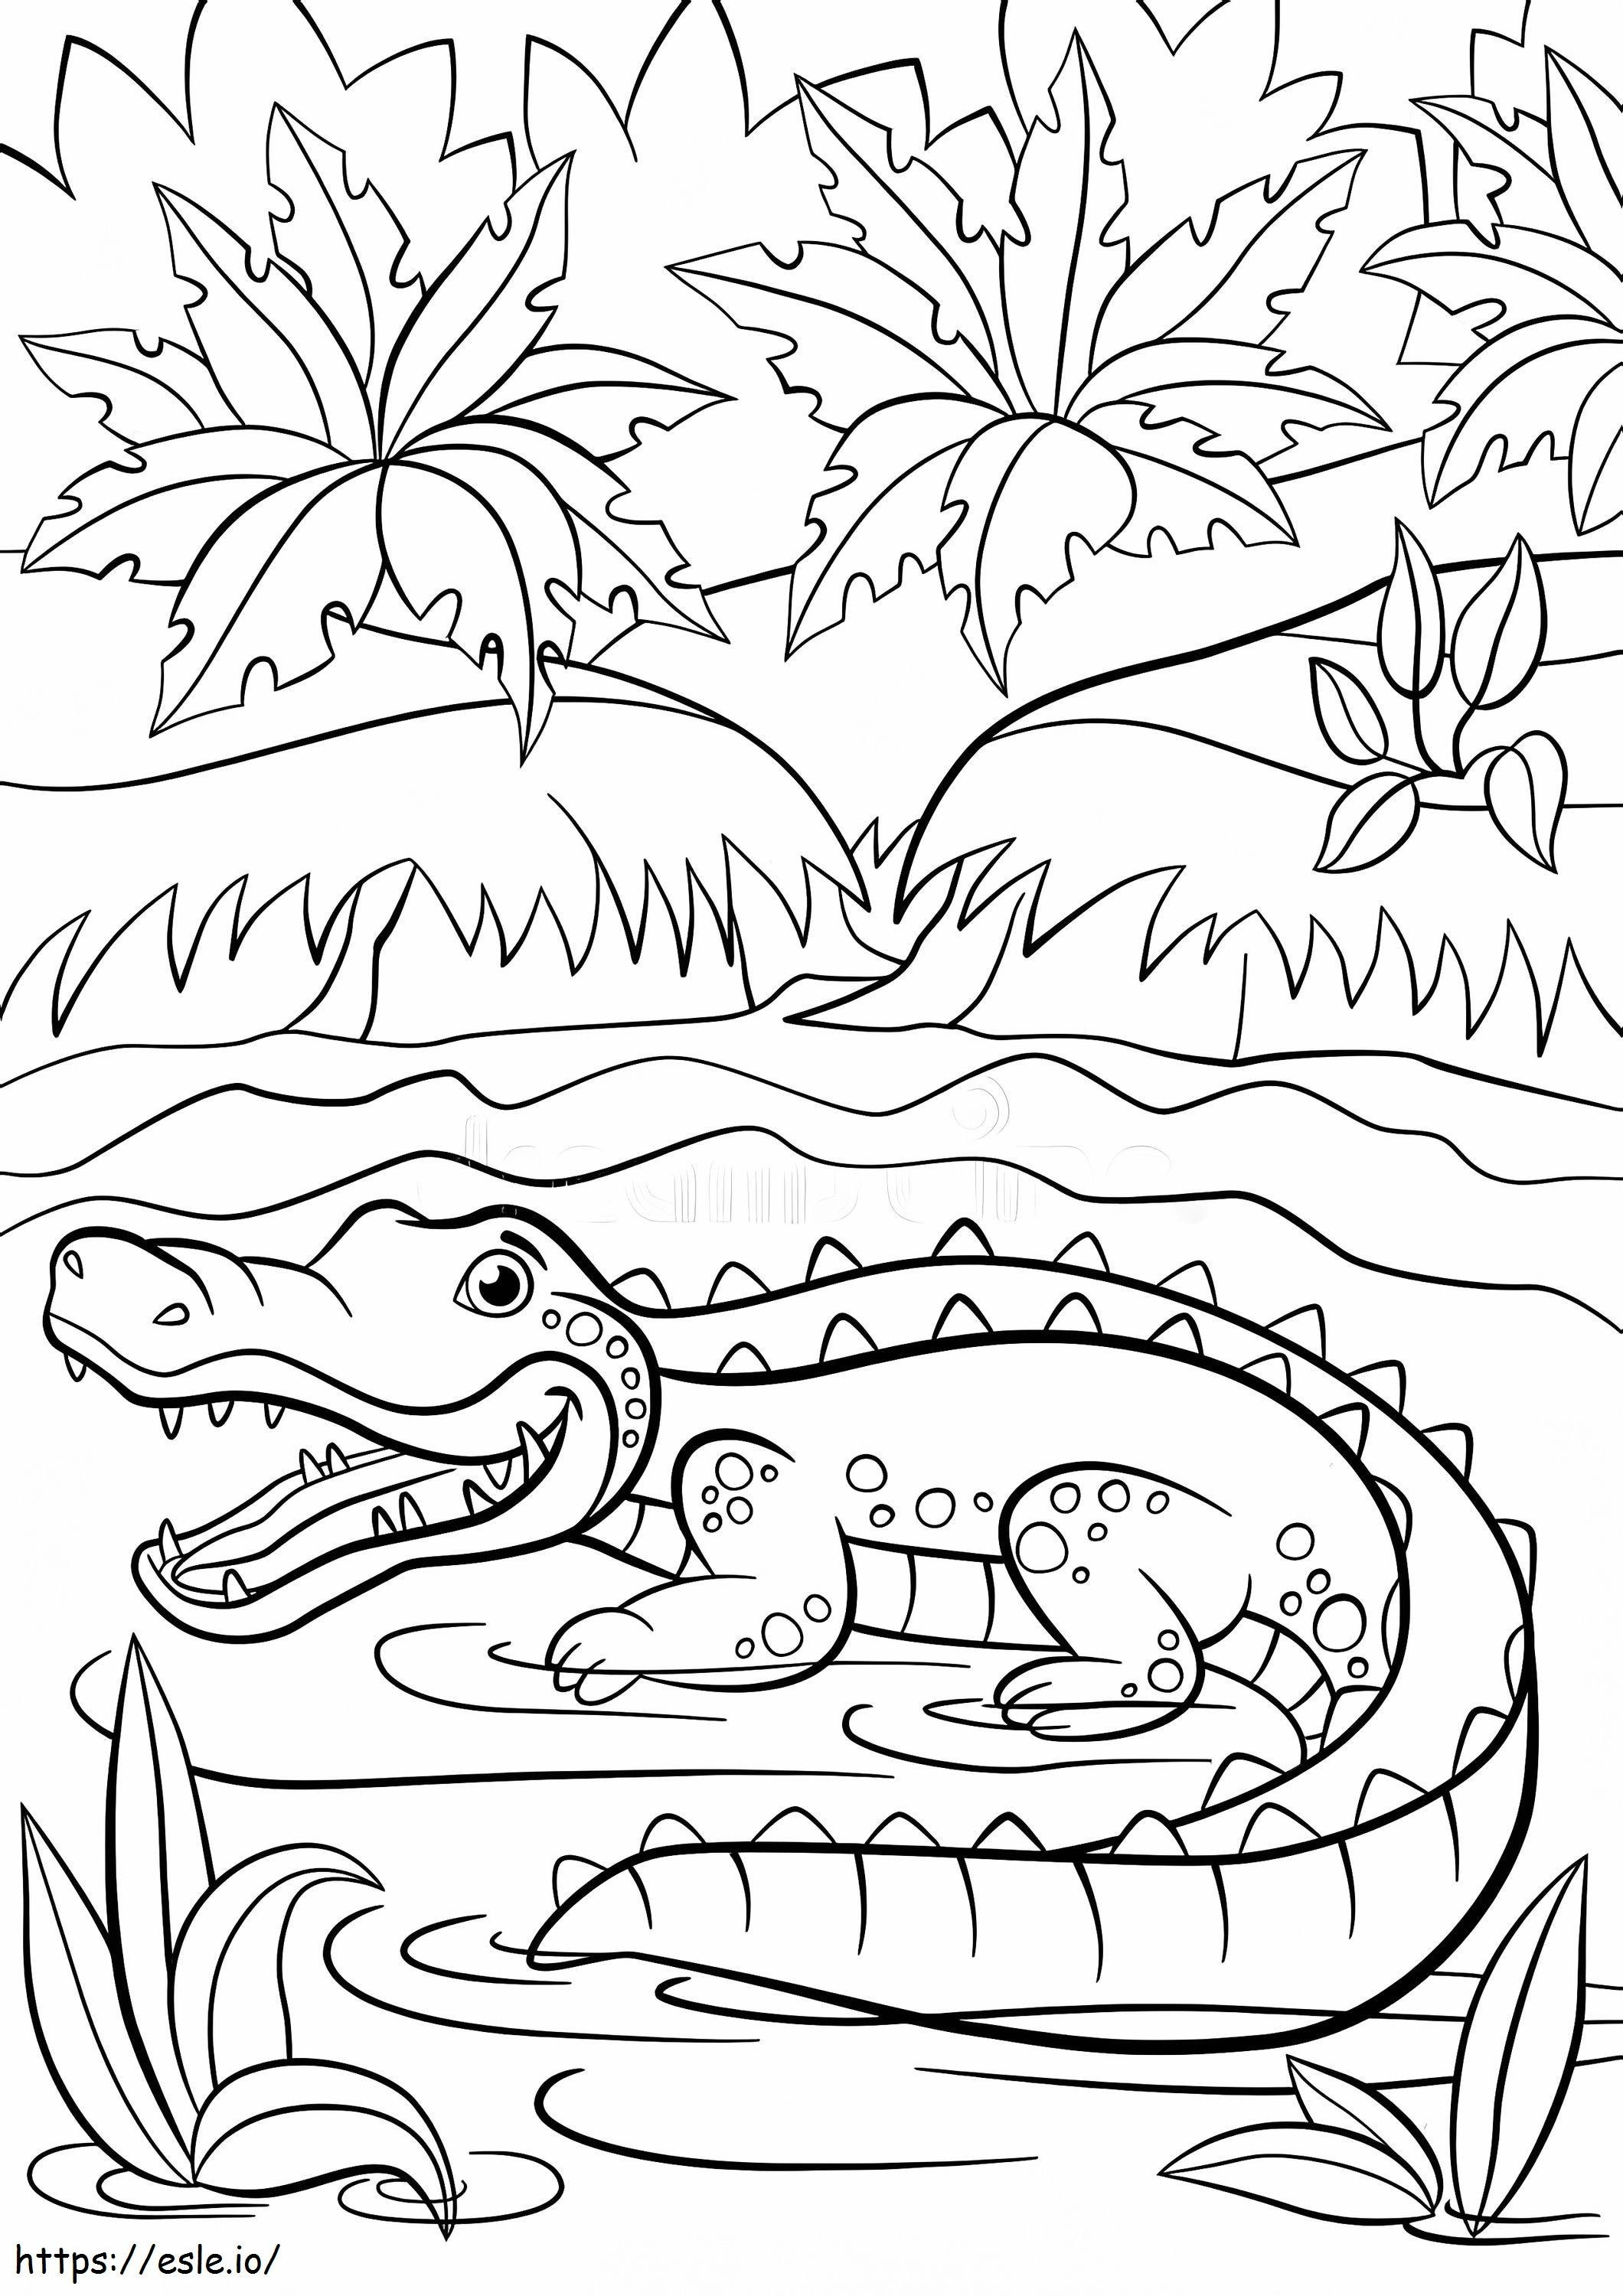 Little Cute Crocodile Sits In The Lake coloring page